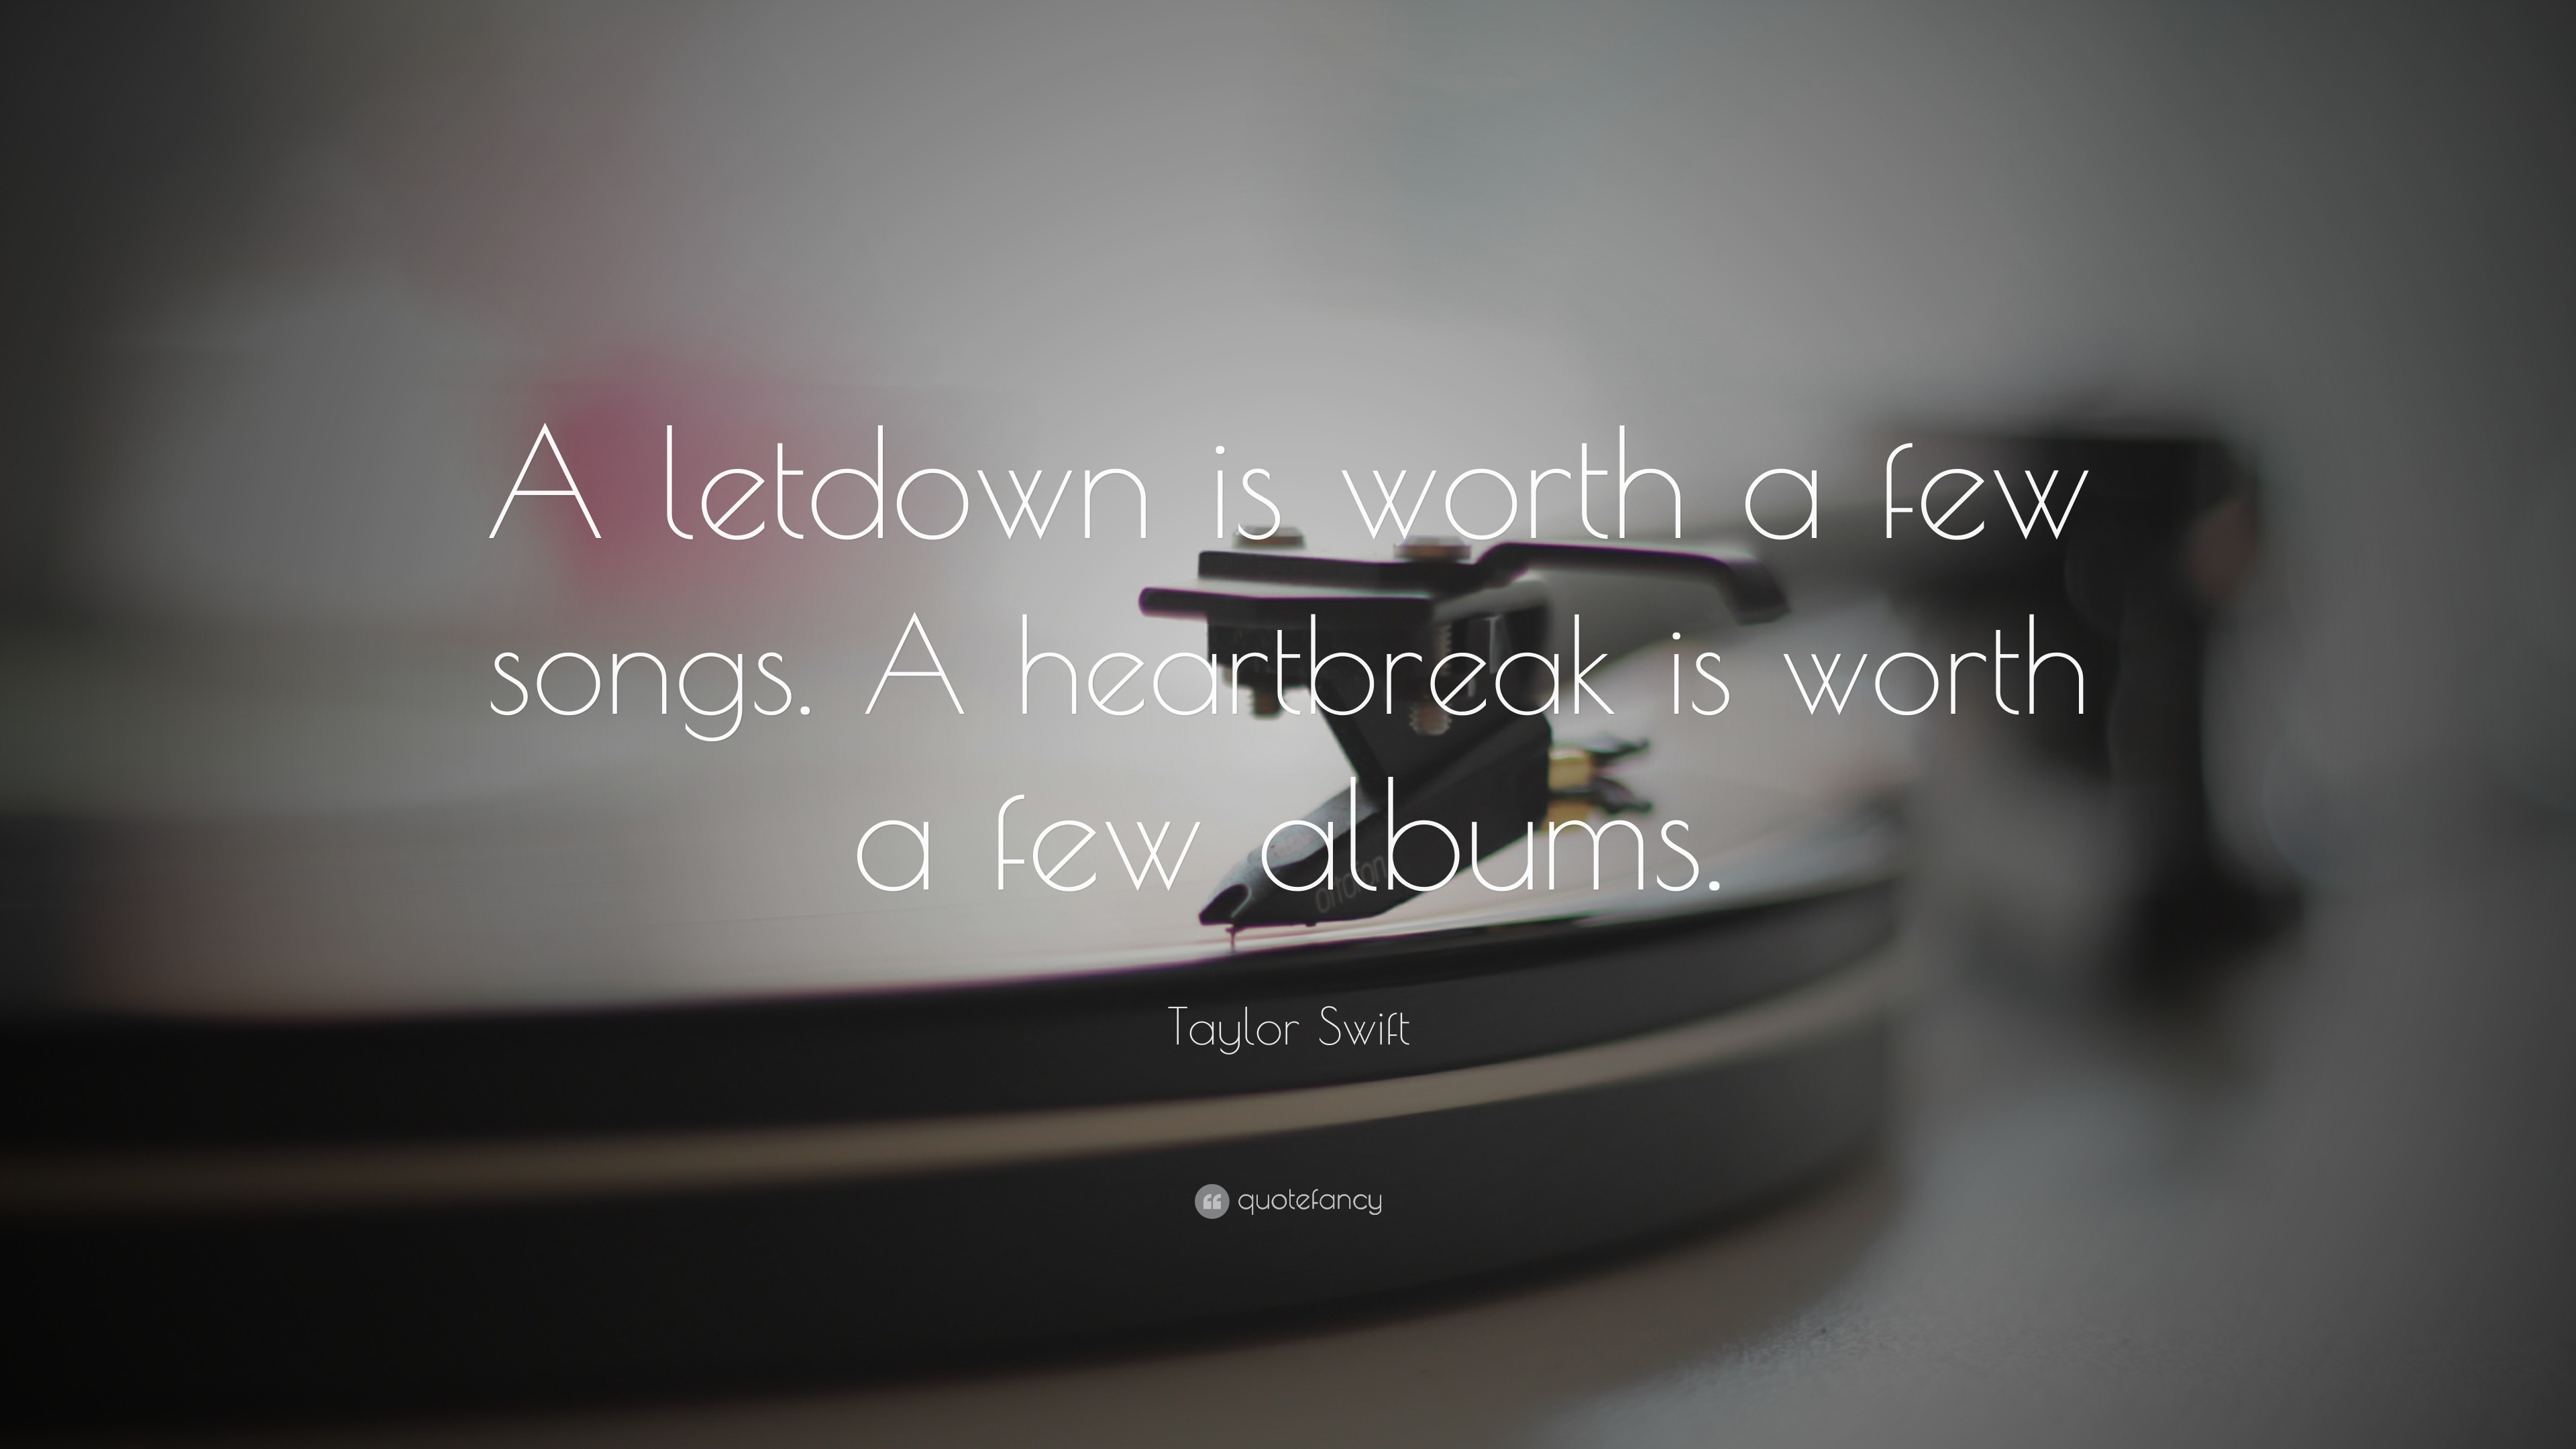 3840x2160 16 wallpapers. Taylor Swift Quote: “A letdown is worth a few songs. A  heartbreak is